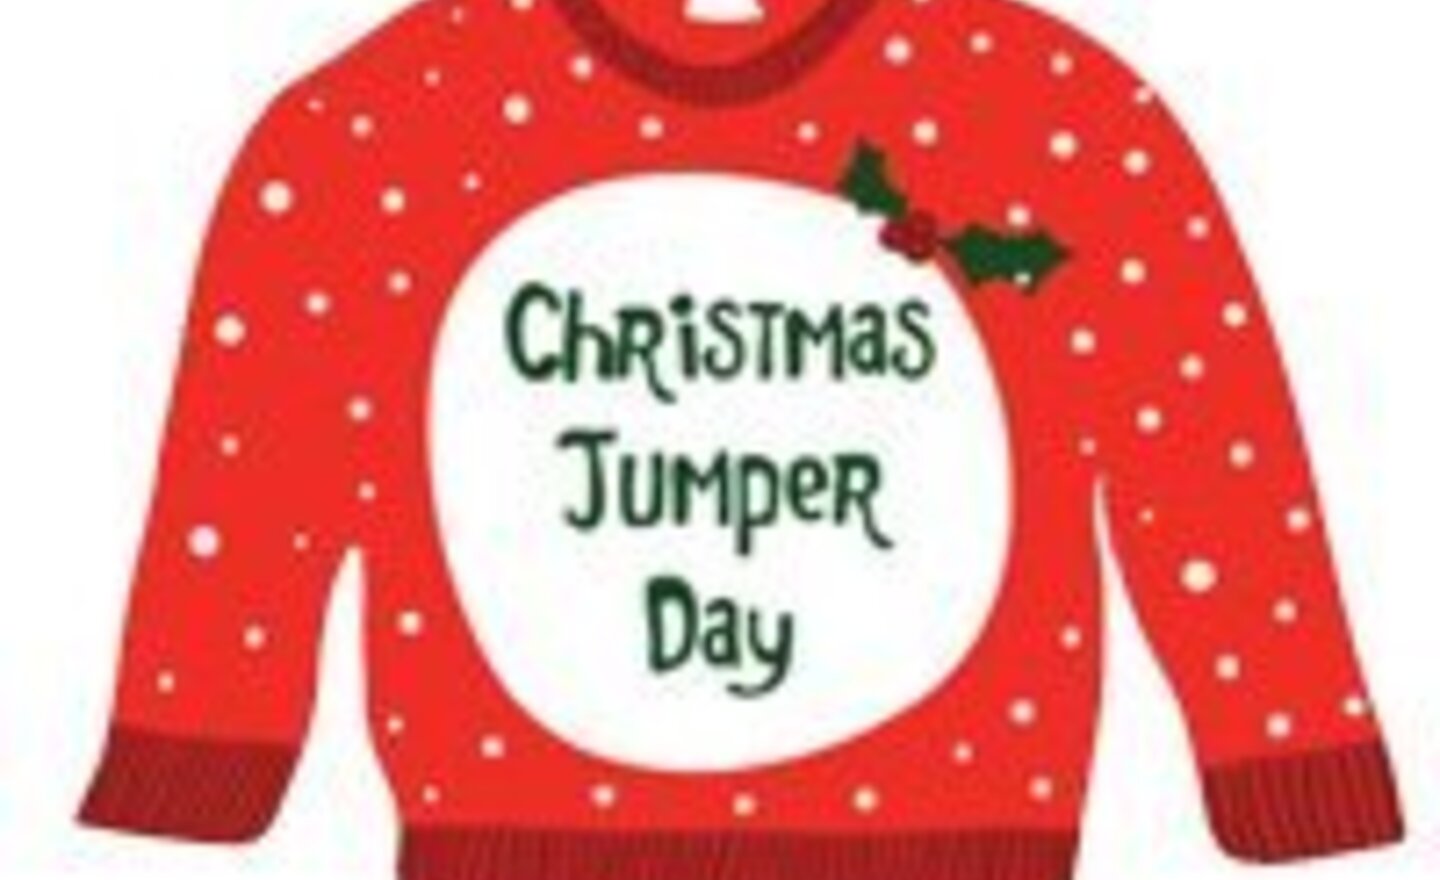 Image of Christmas Jumper Day and Christmas Dinner Day